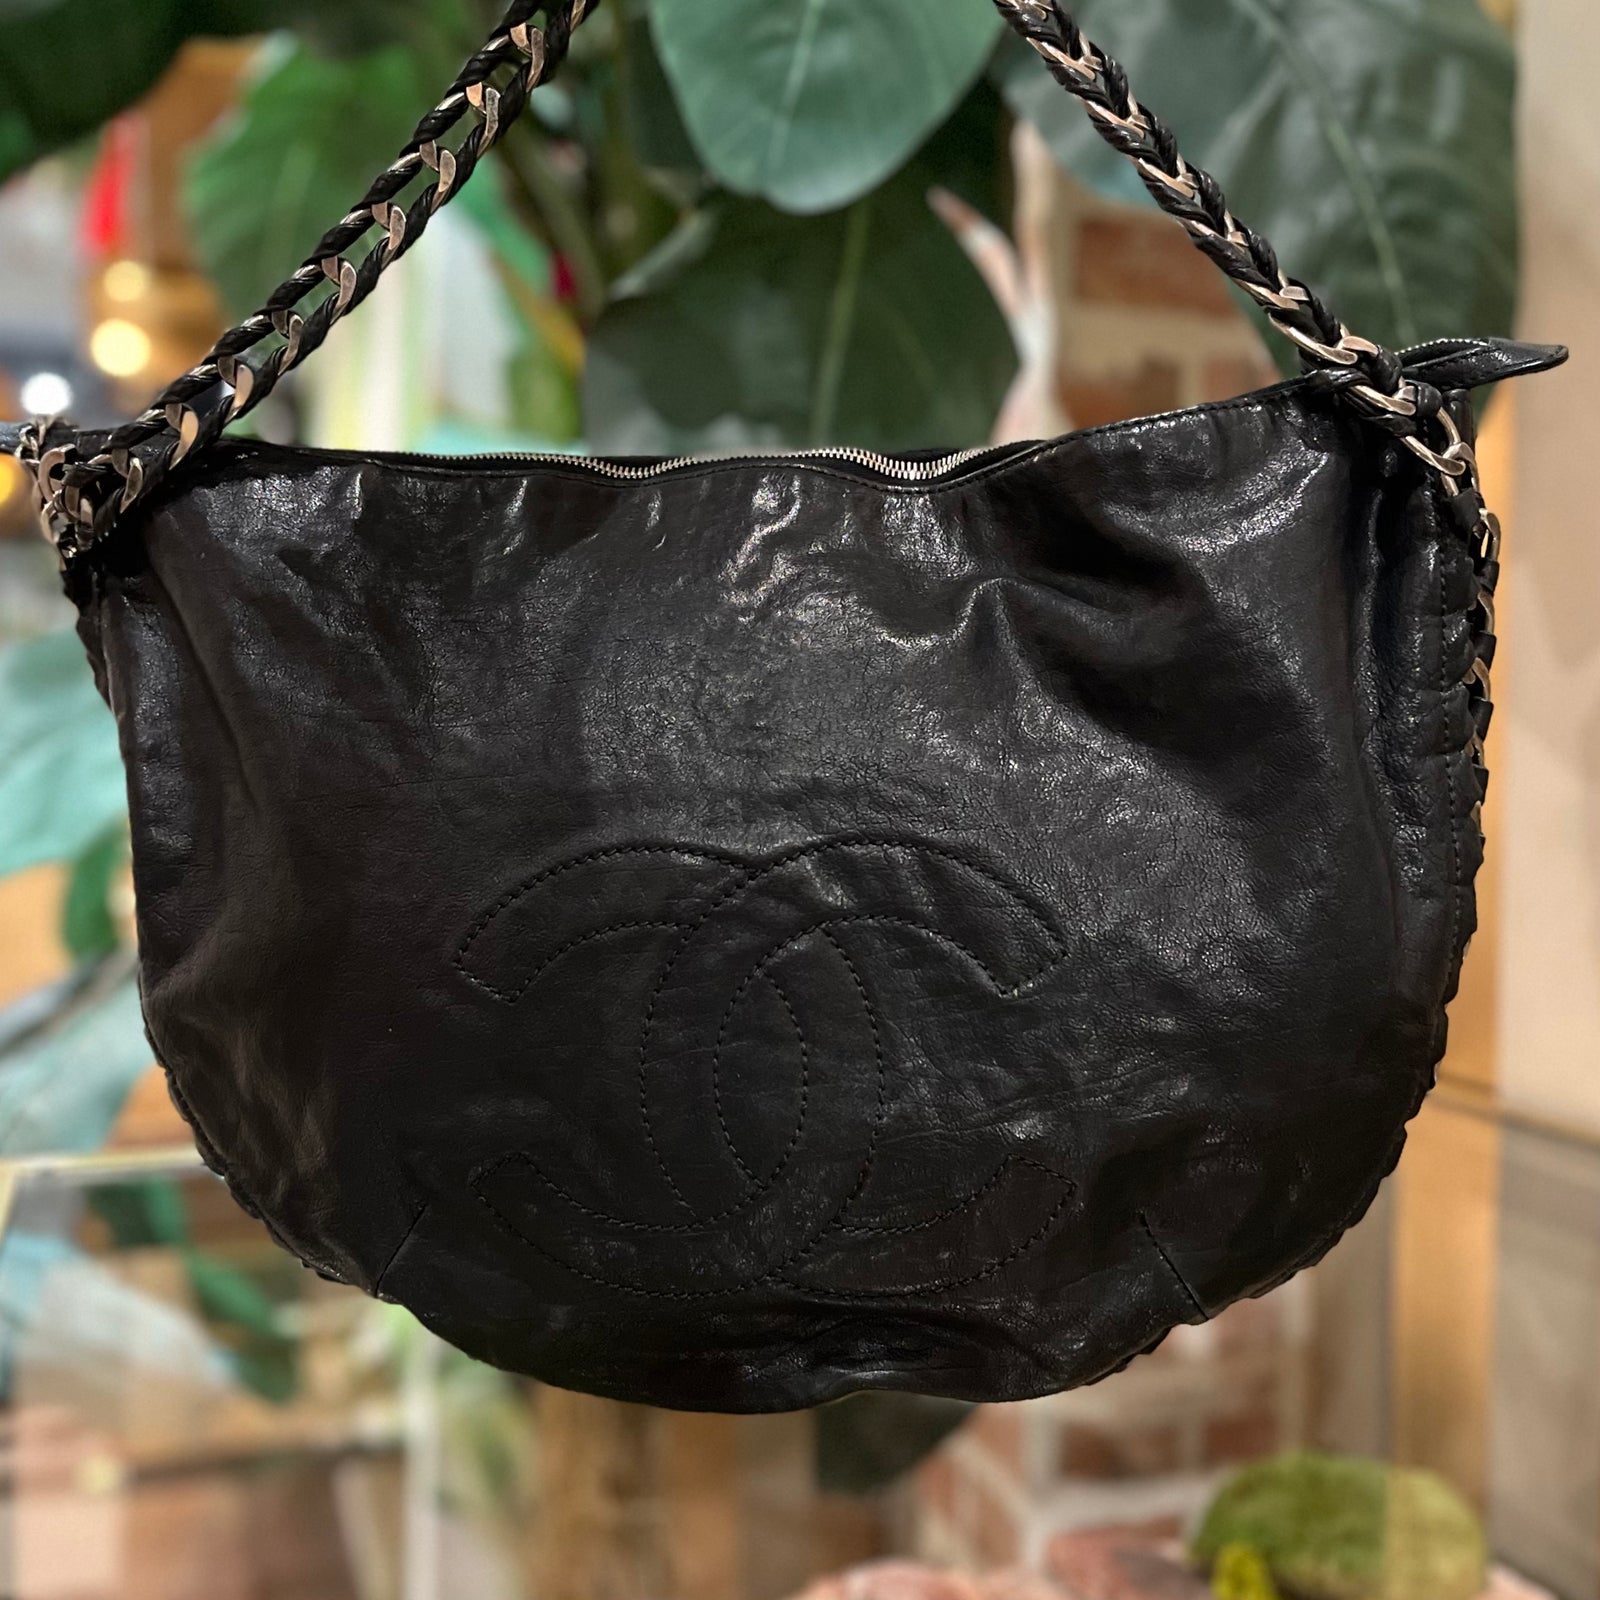 Chanel Tagged Hobo Bags - The Purse Ladies